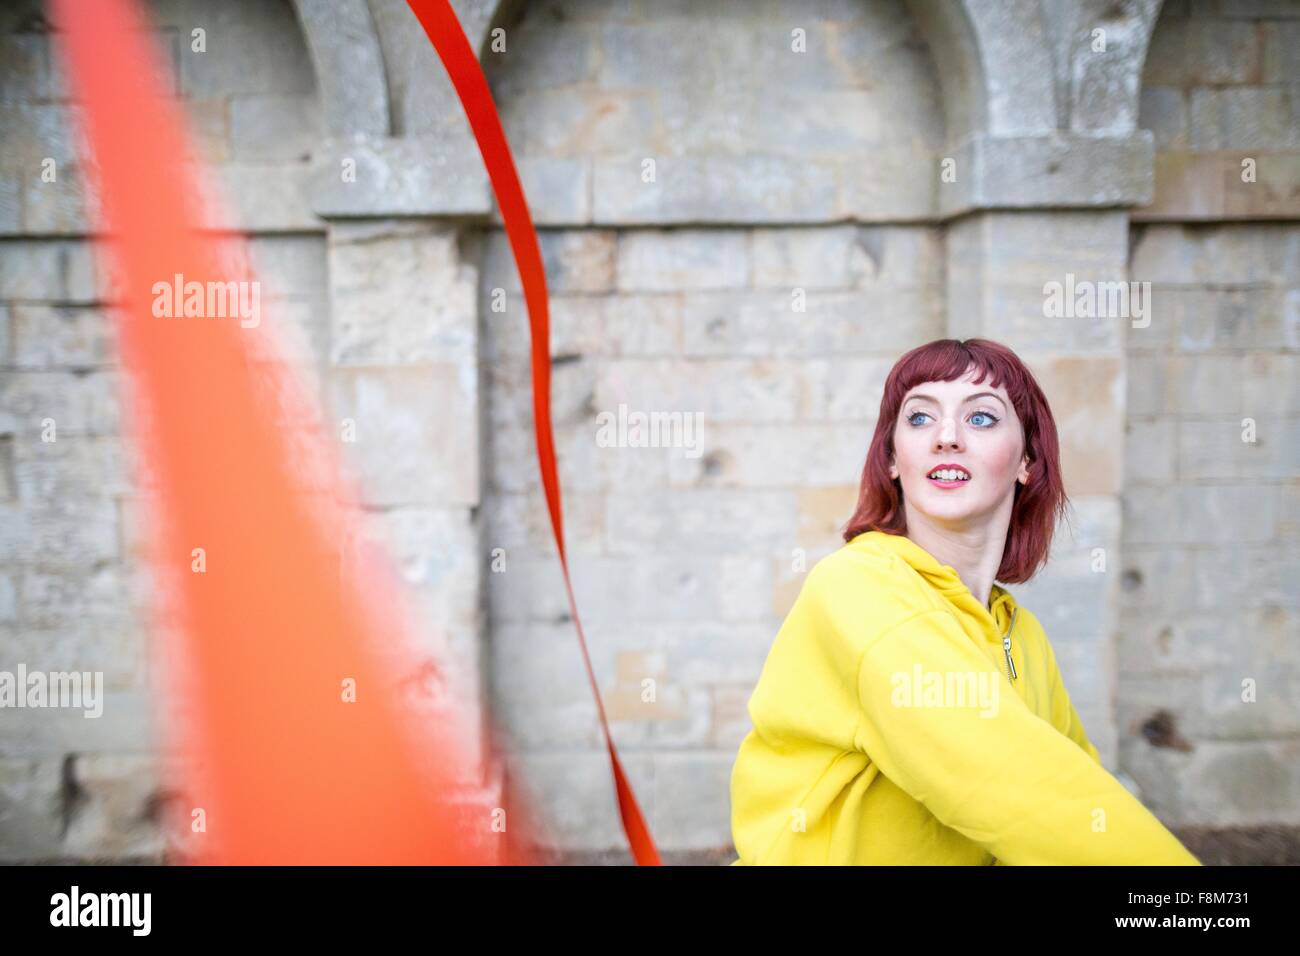 Young woman practising ribbon dance, walled arches in background Stock Photo